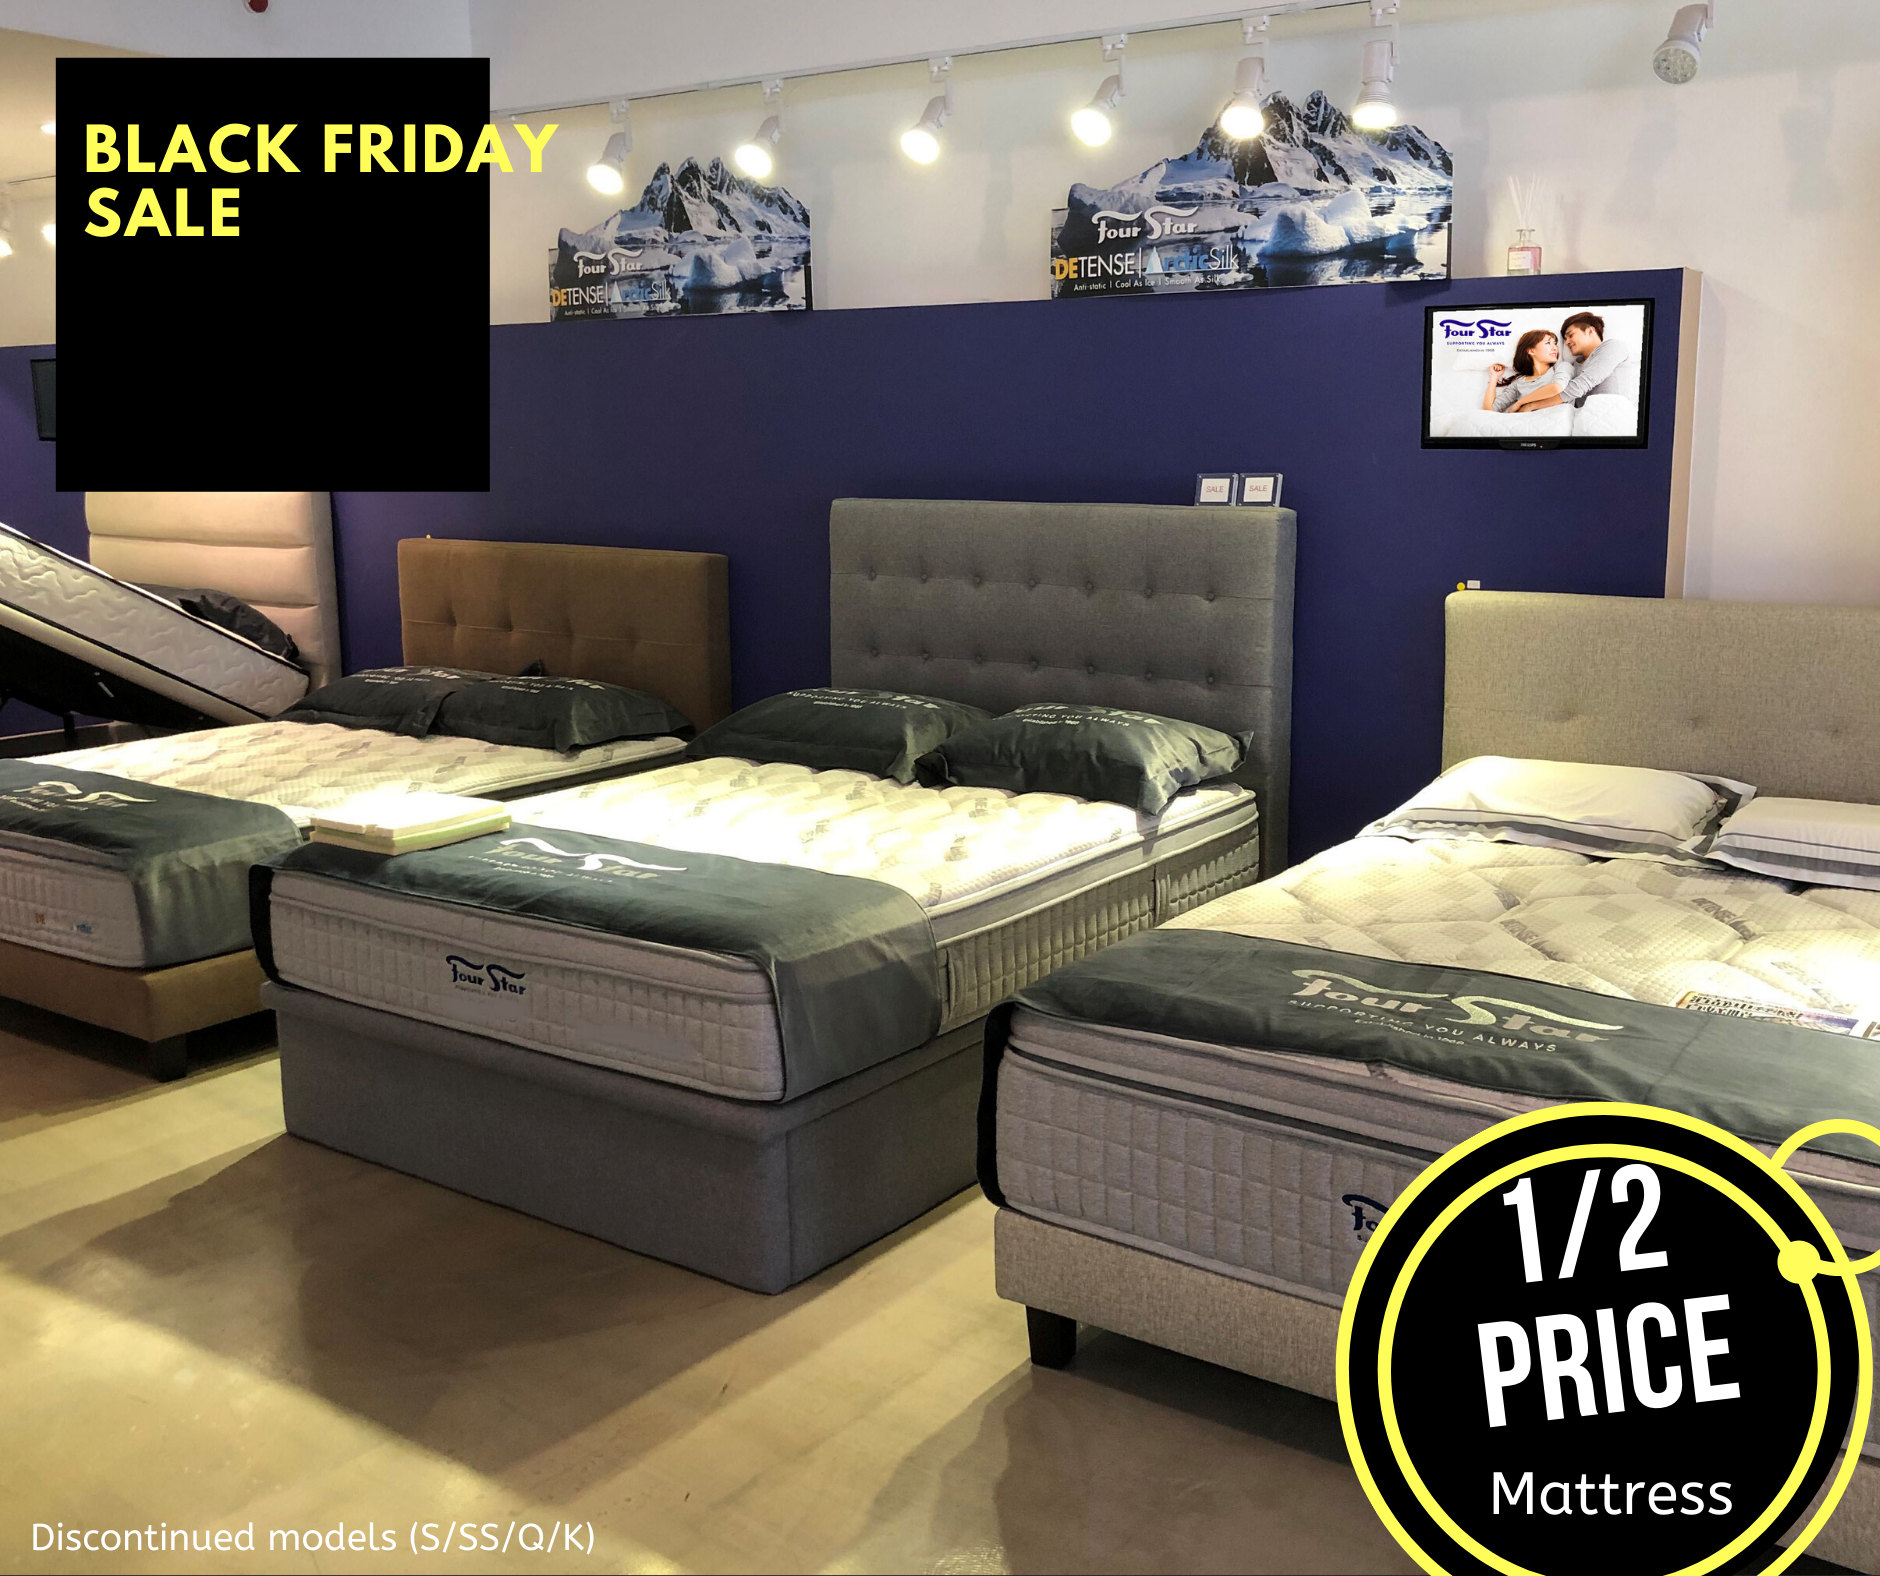 2 DAYS ONLY! 16 – 17 NOV Four Star Mattress Gallery is having Pre BLACK FRIDAY SALE with its largest discount this year! - 1